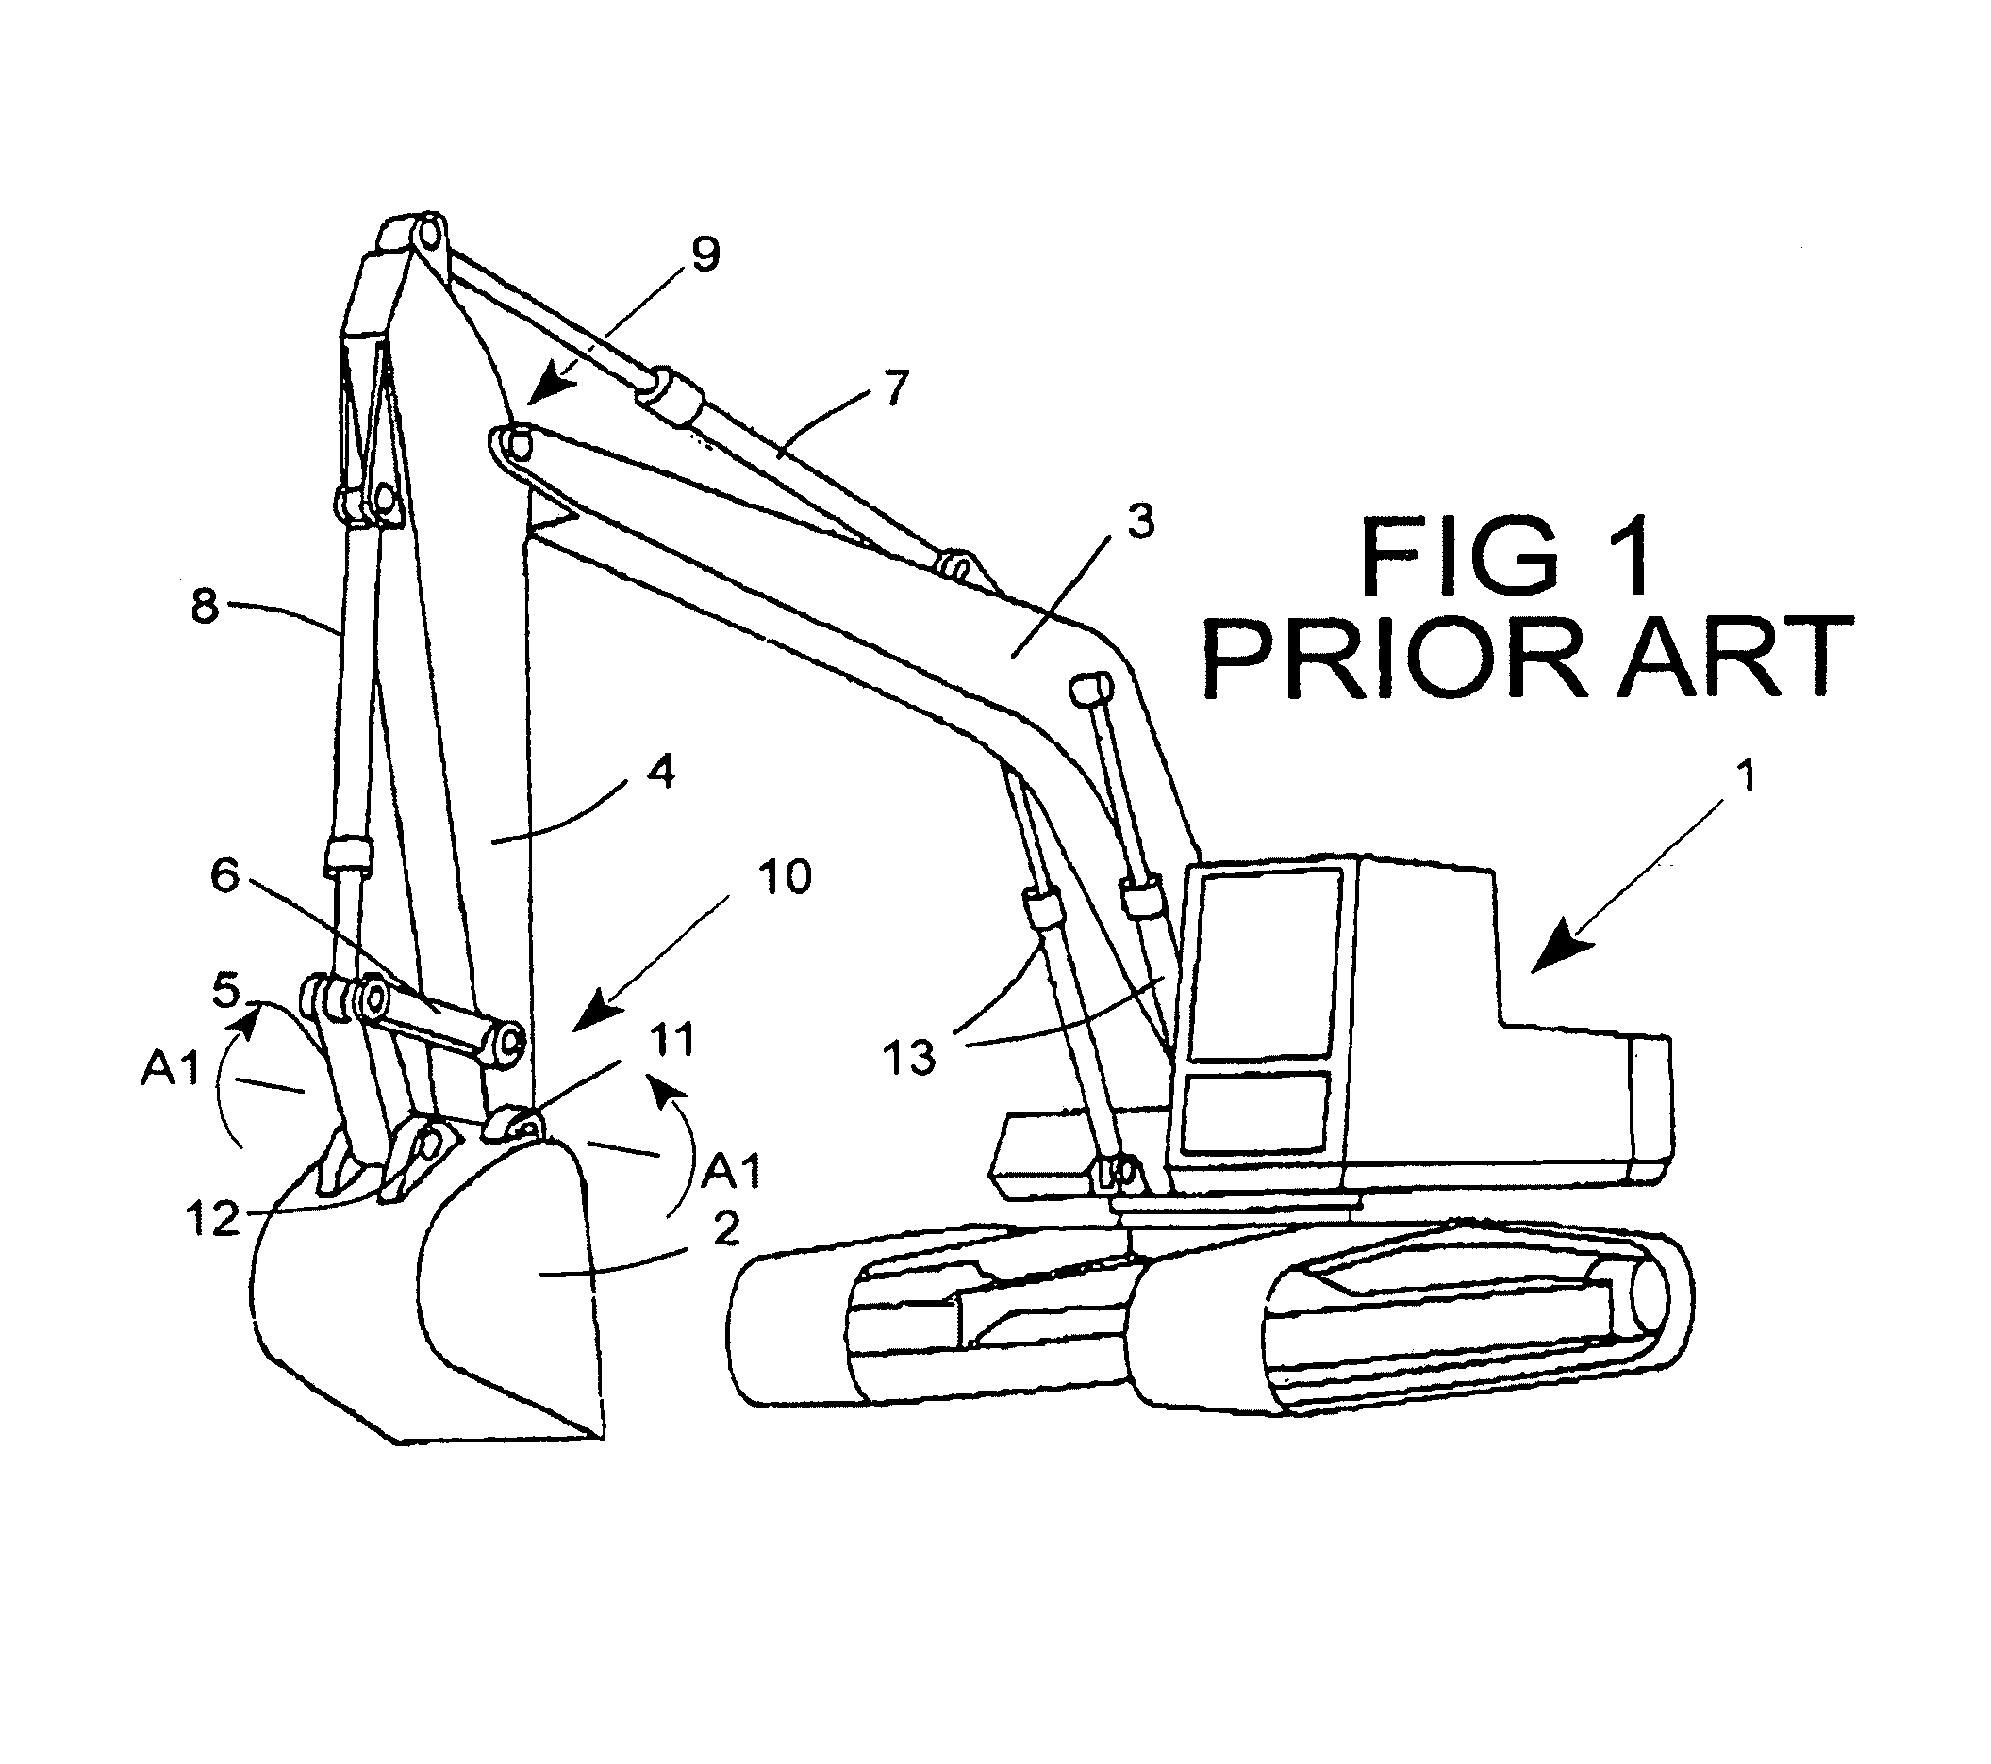 Excavating apparatus employing swivel adapter with gear bearings having gears with divergent thickness